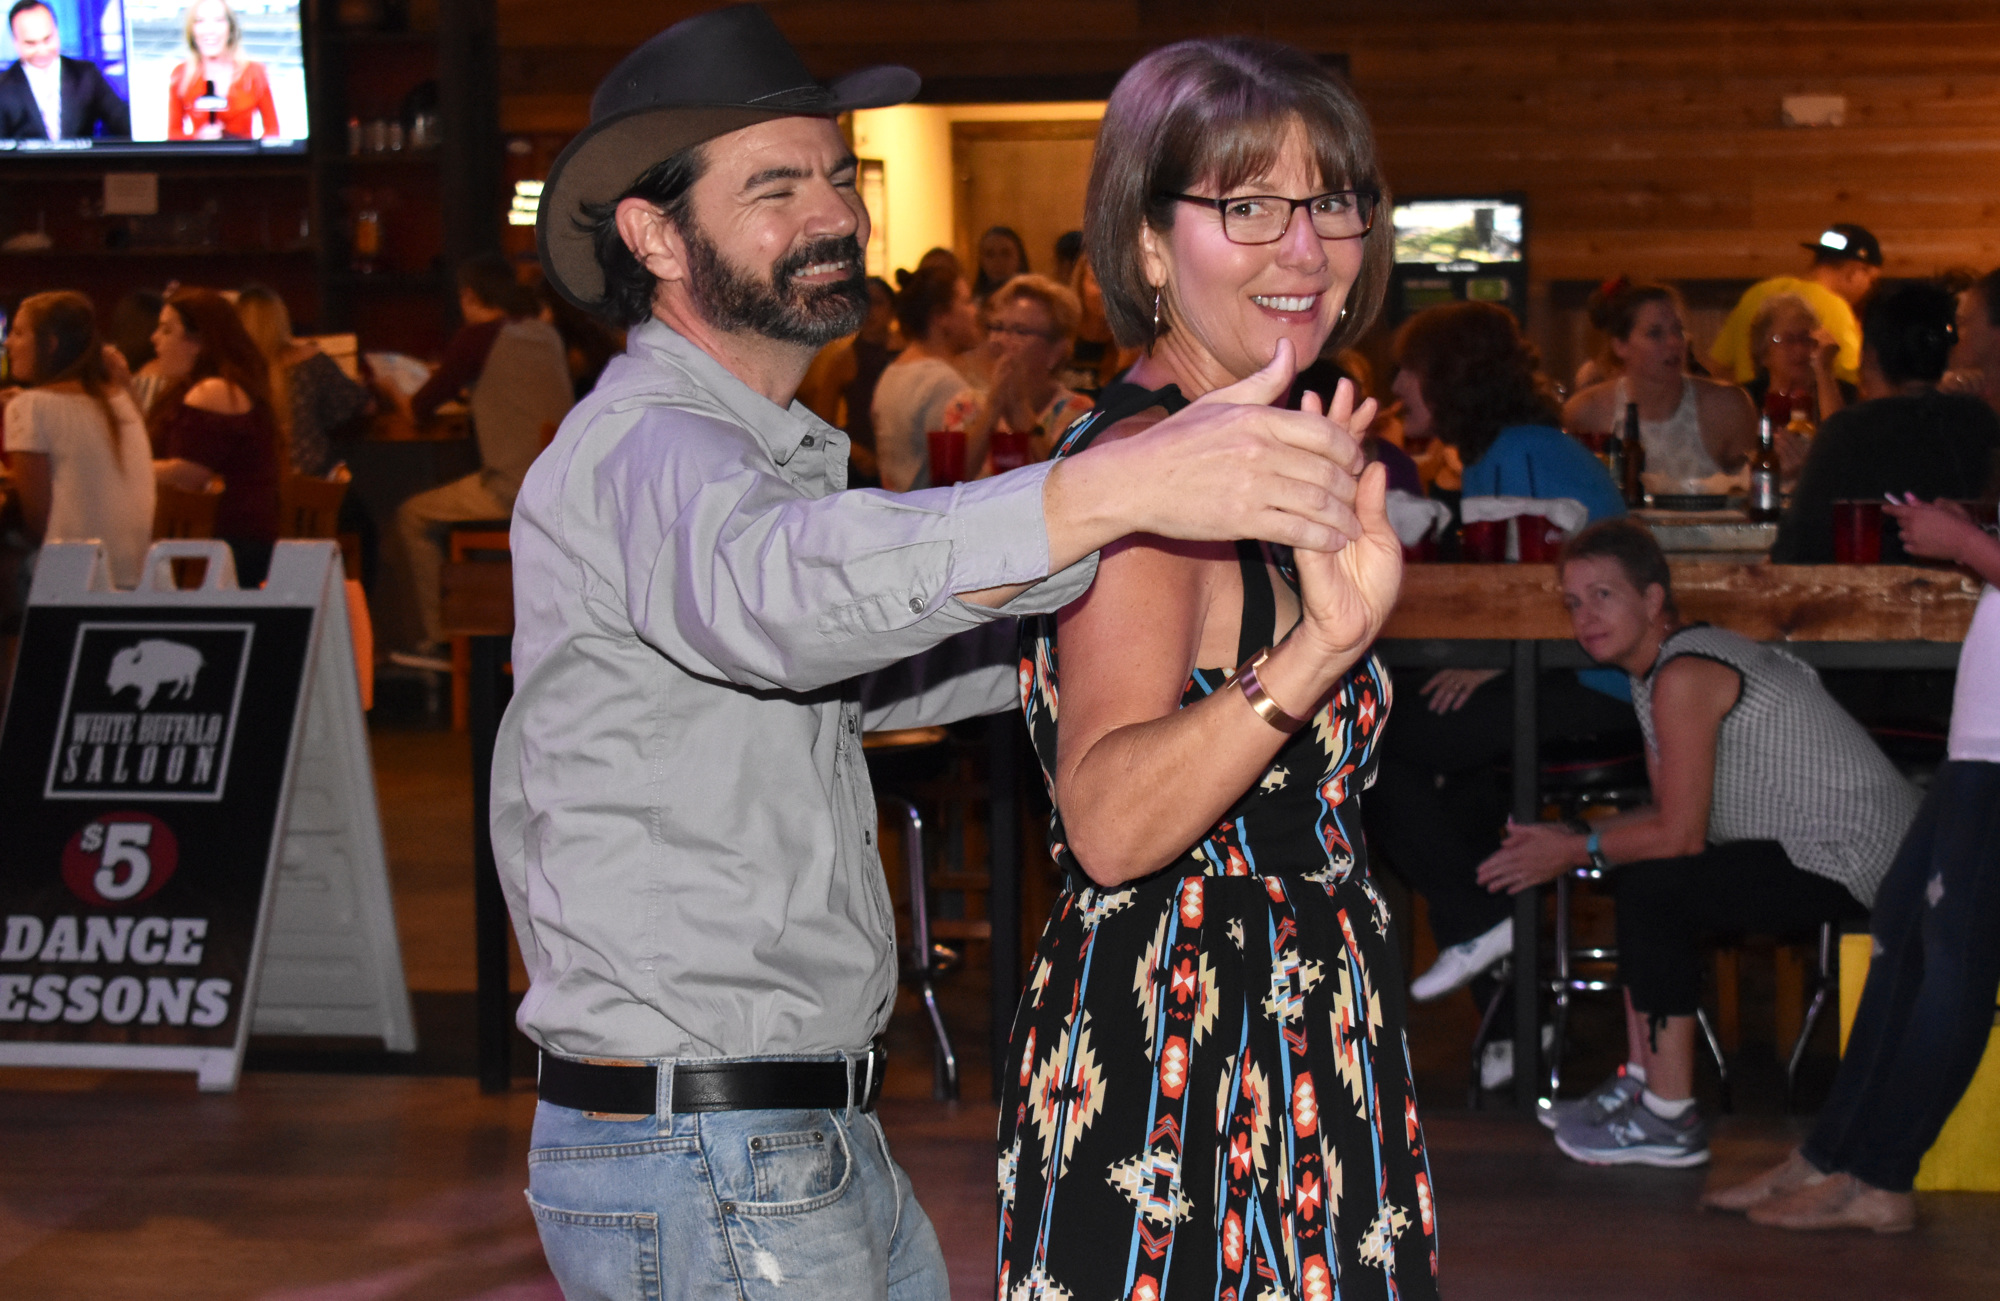 Many regulars like Michael Raimondi and Adria Stasko participate in both line dancing and partner dancing, the latter of which is done by circling the line dancers in the middle of the dance floor. Photo by Niki Kottmann